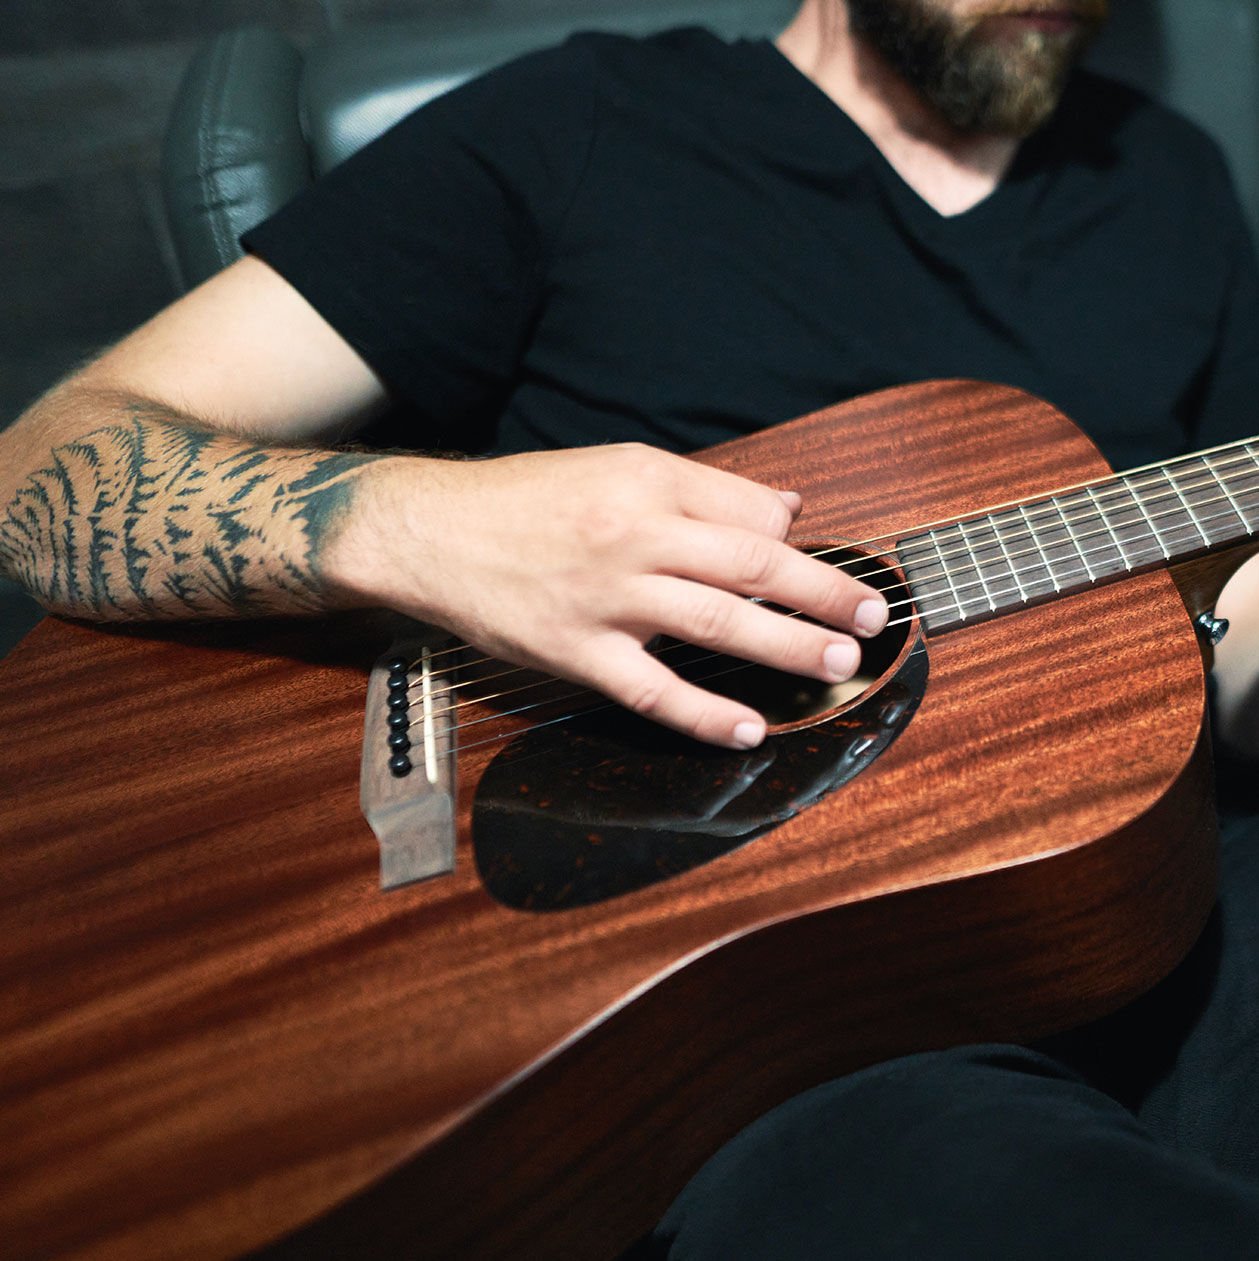 Man with tattoos playing an acoustic guitar